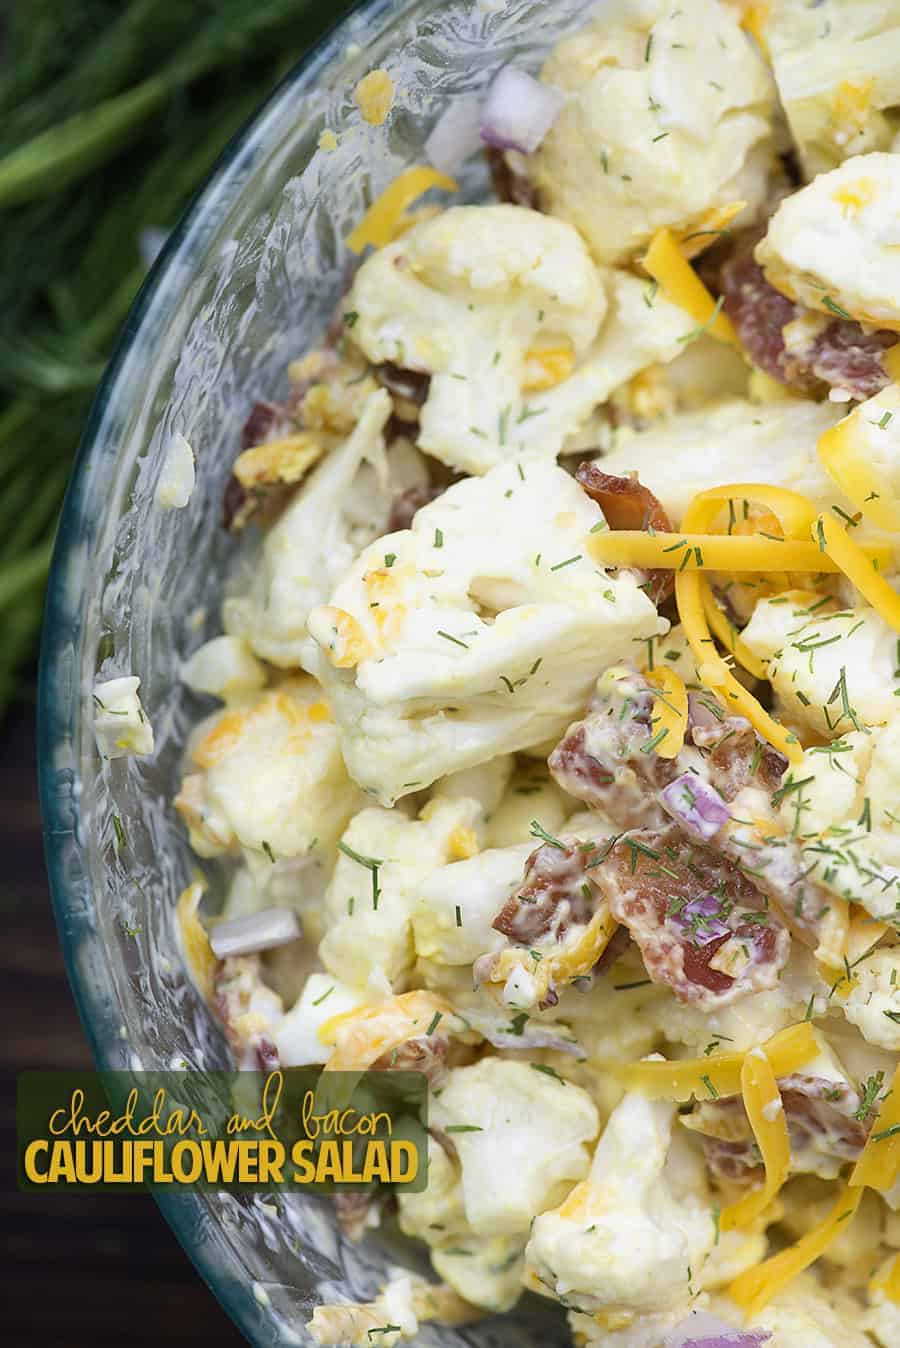 Cheddar Bacon Cauliflower Salad! This is a great low carb side dish for potlucks and barbecues.